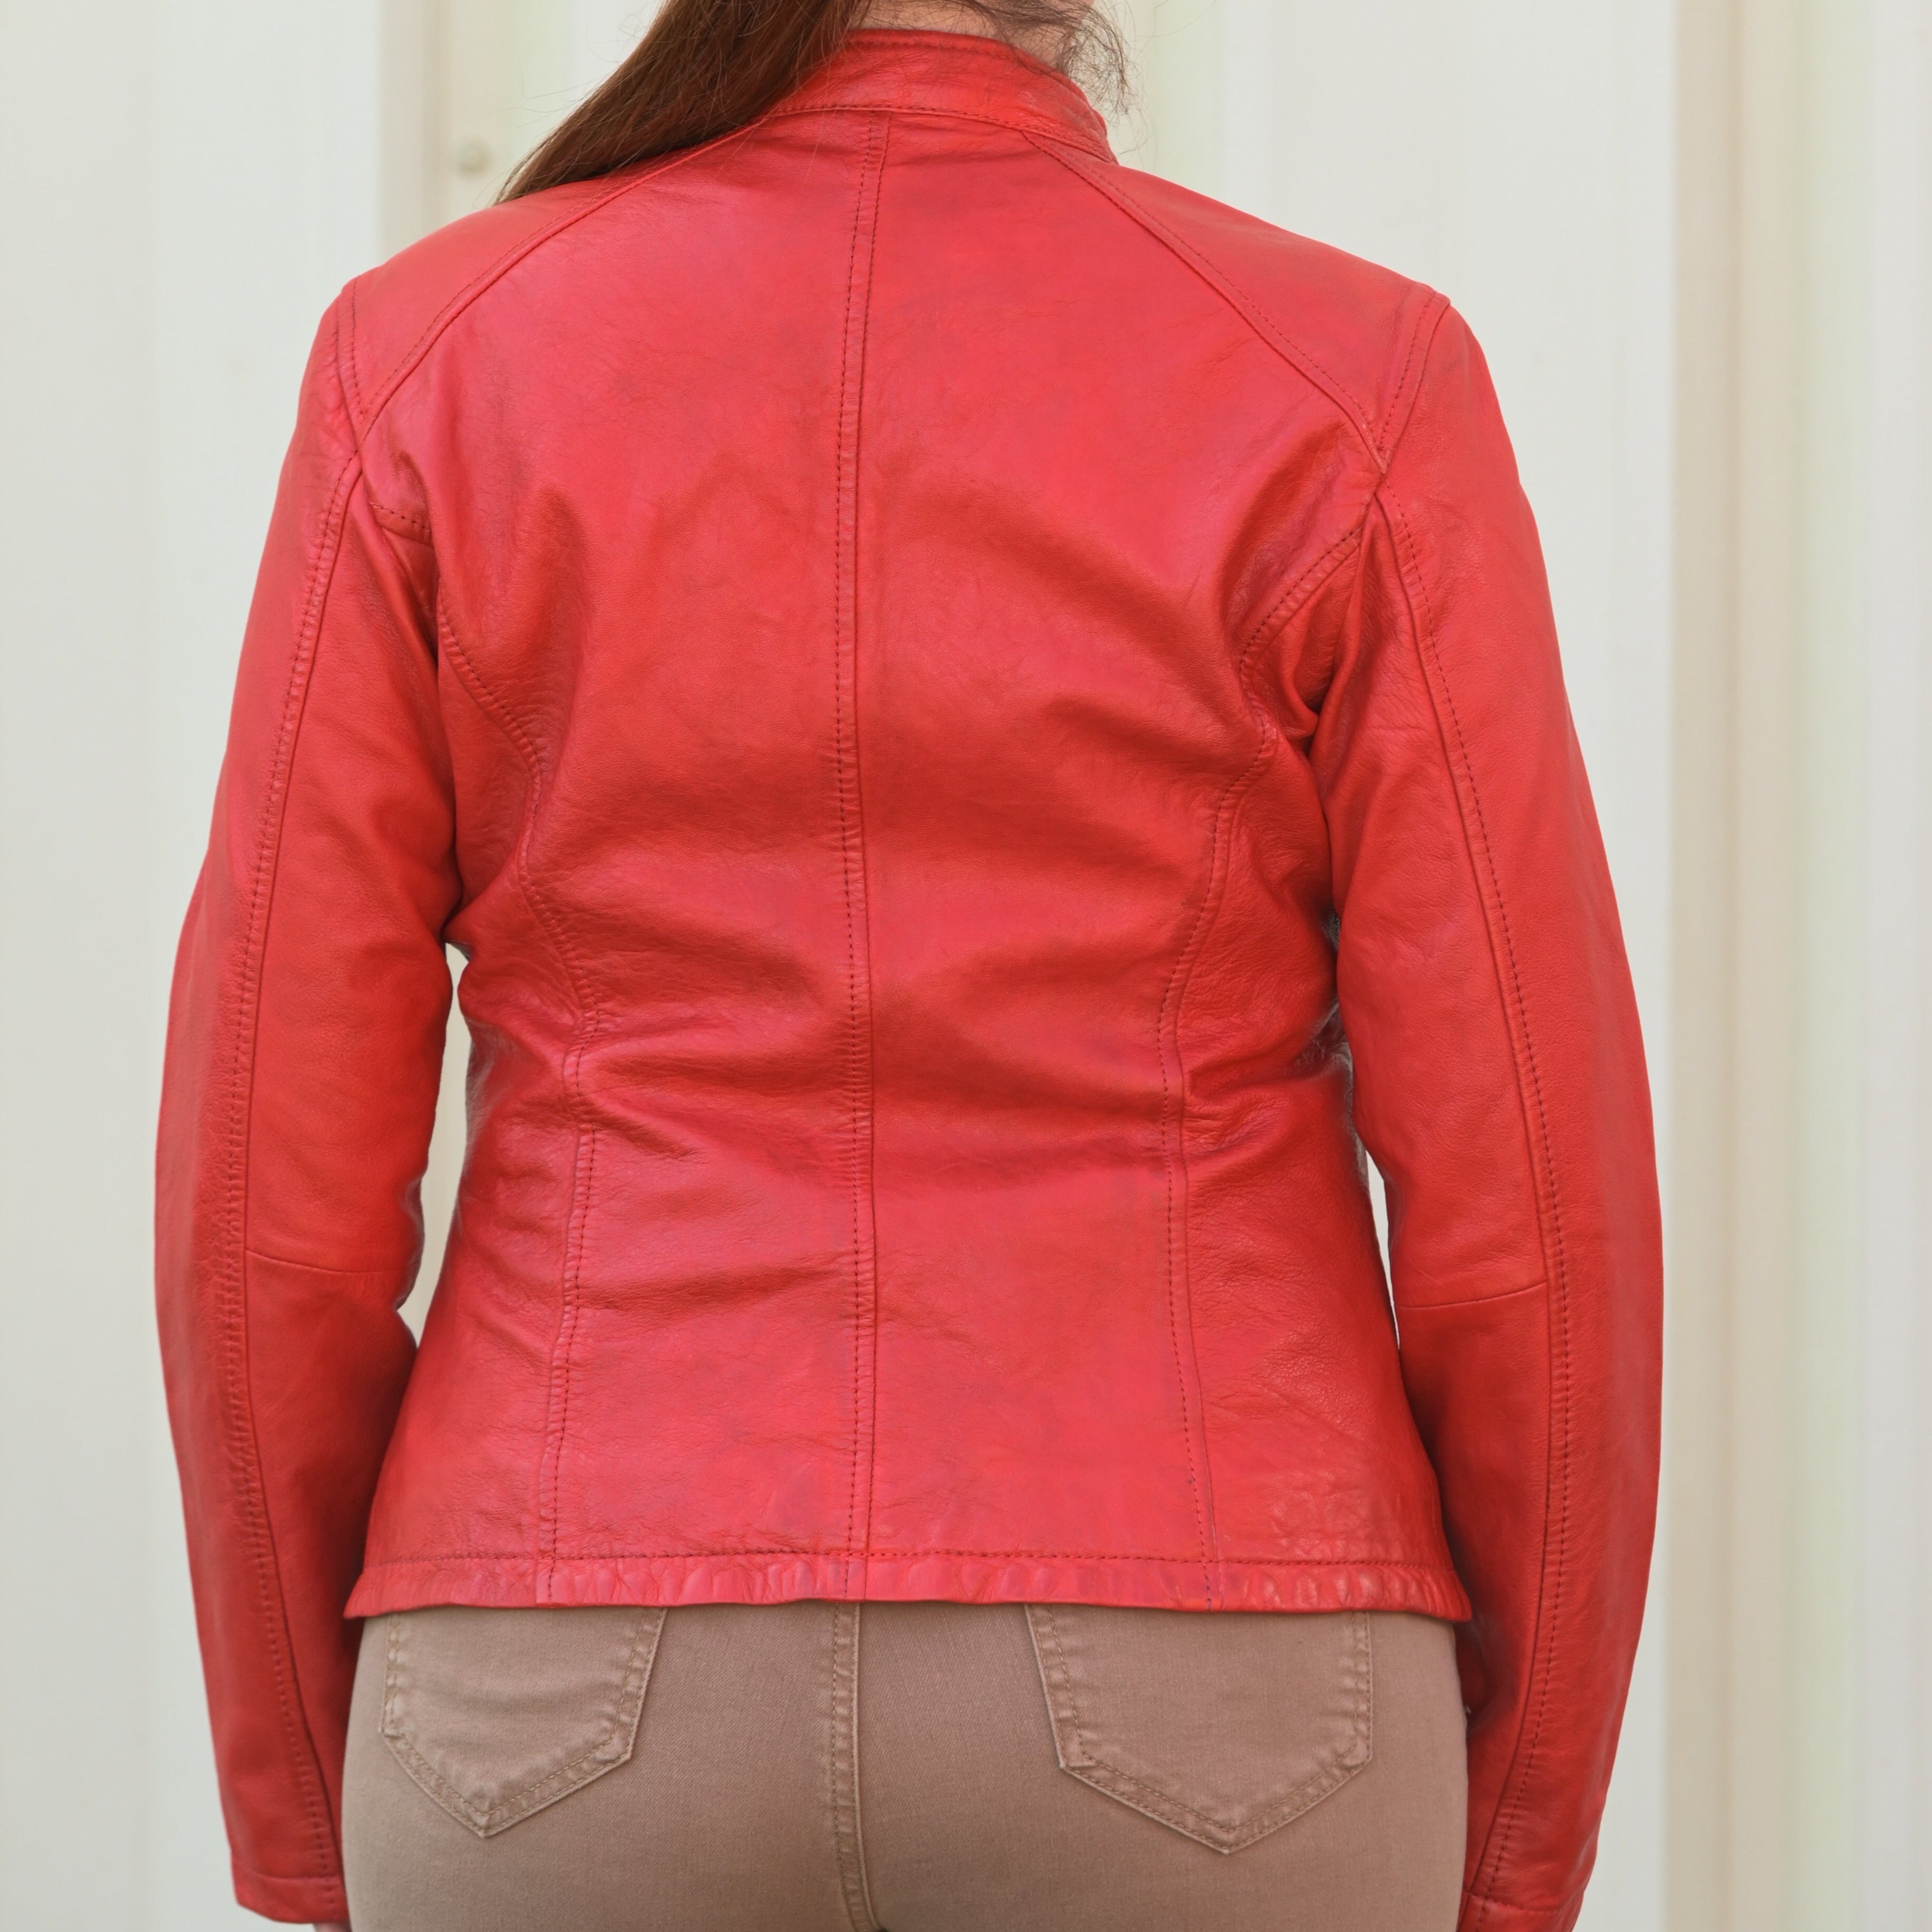 Women's Classic Leather Jacket - Boutique of Leathers/Open Road